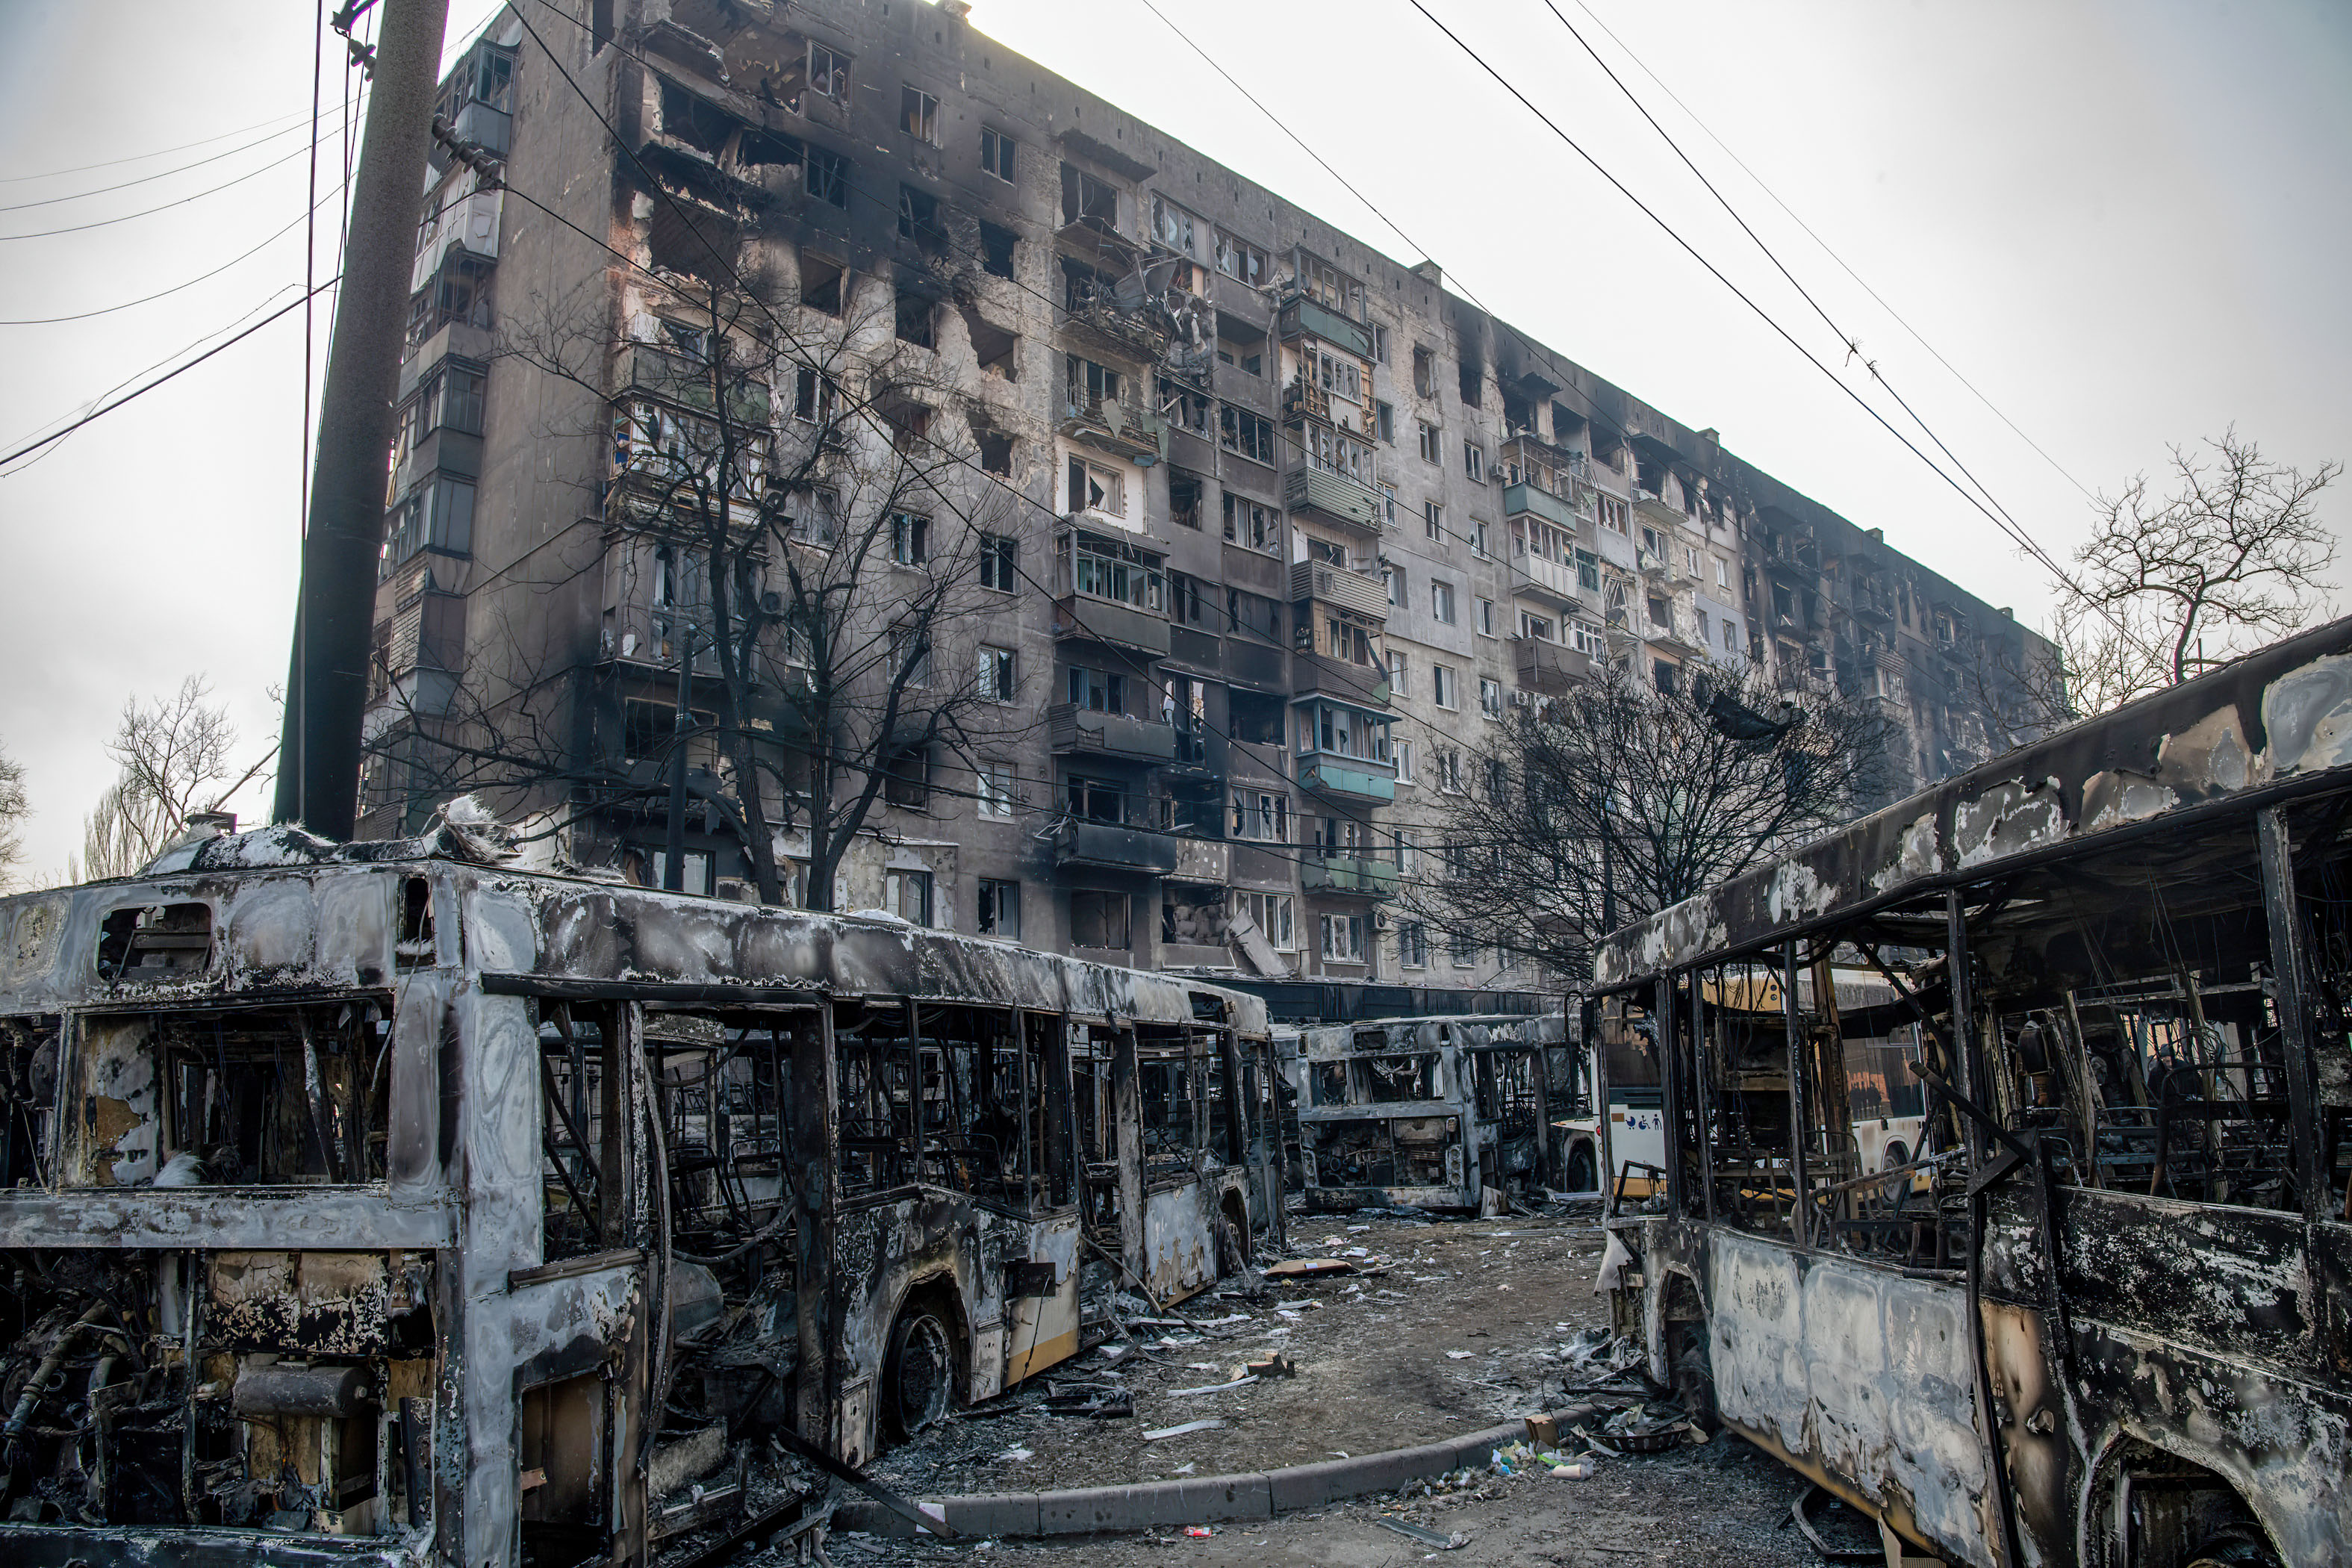 Destruction in the streets of Mariupol, Ukraine, on March 23.